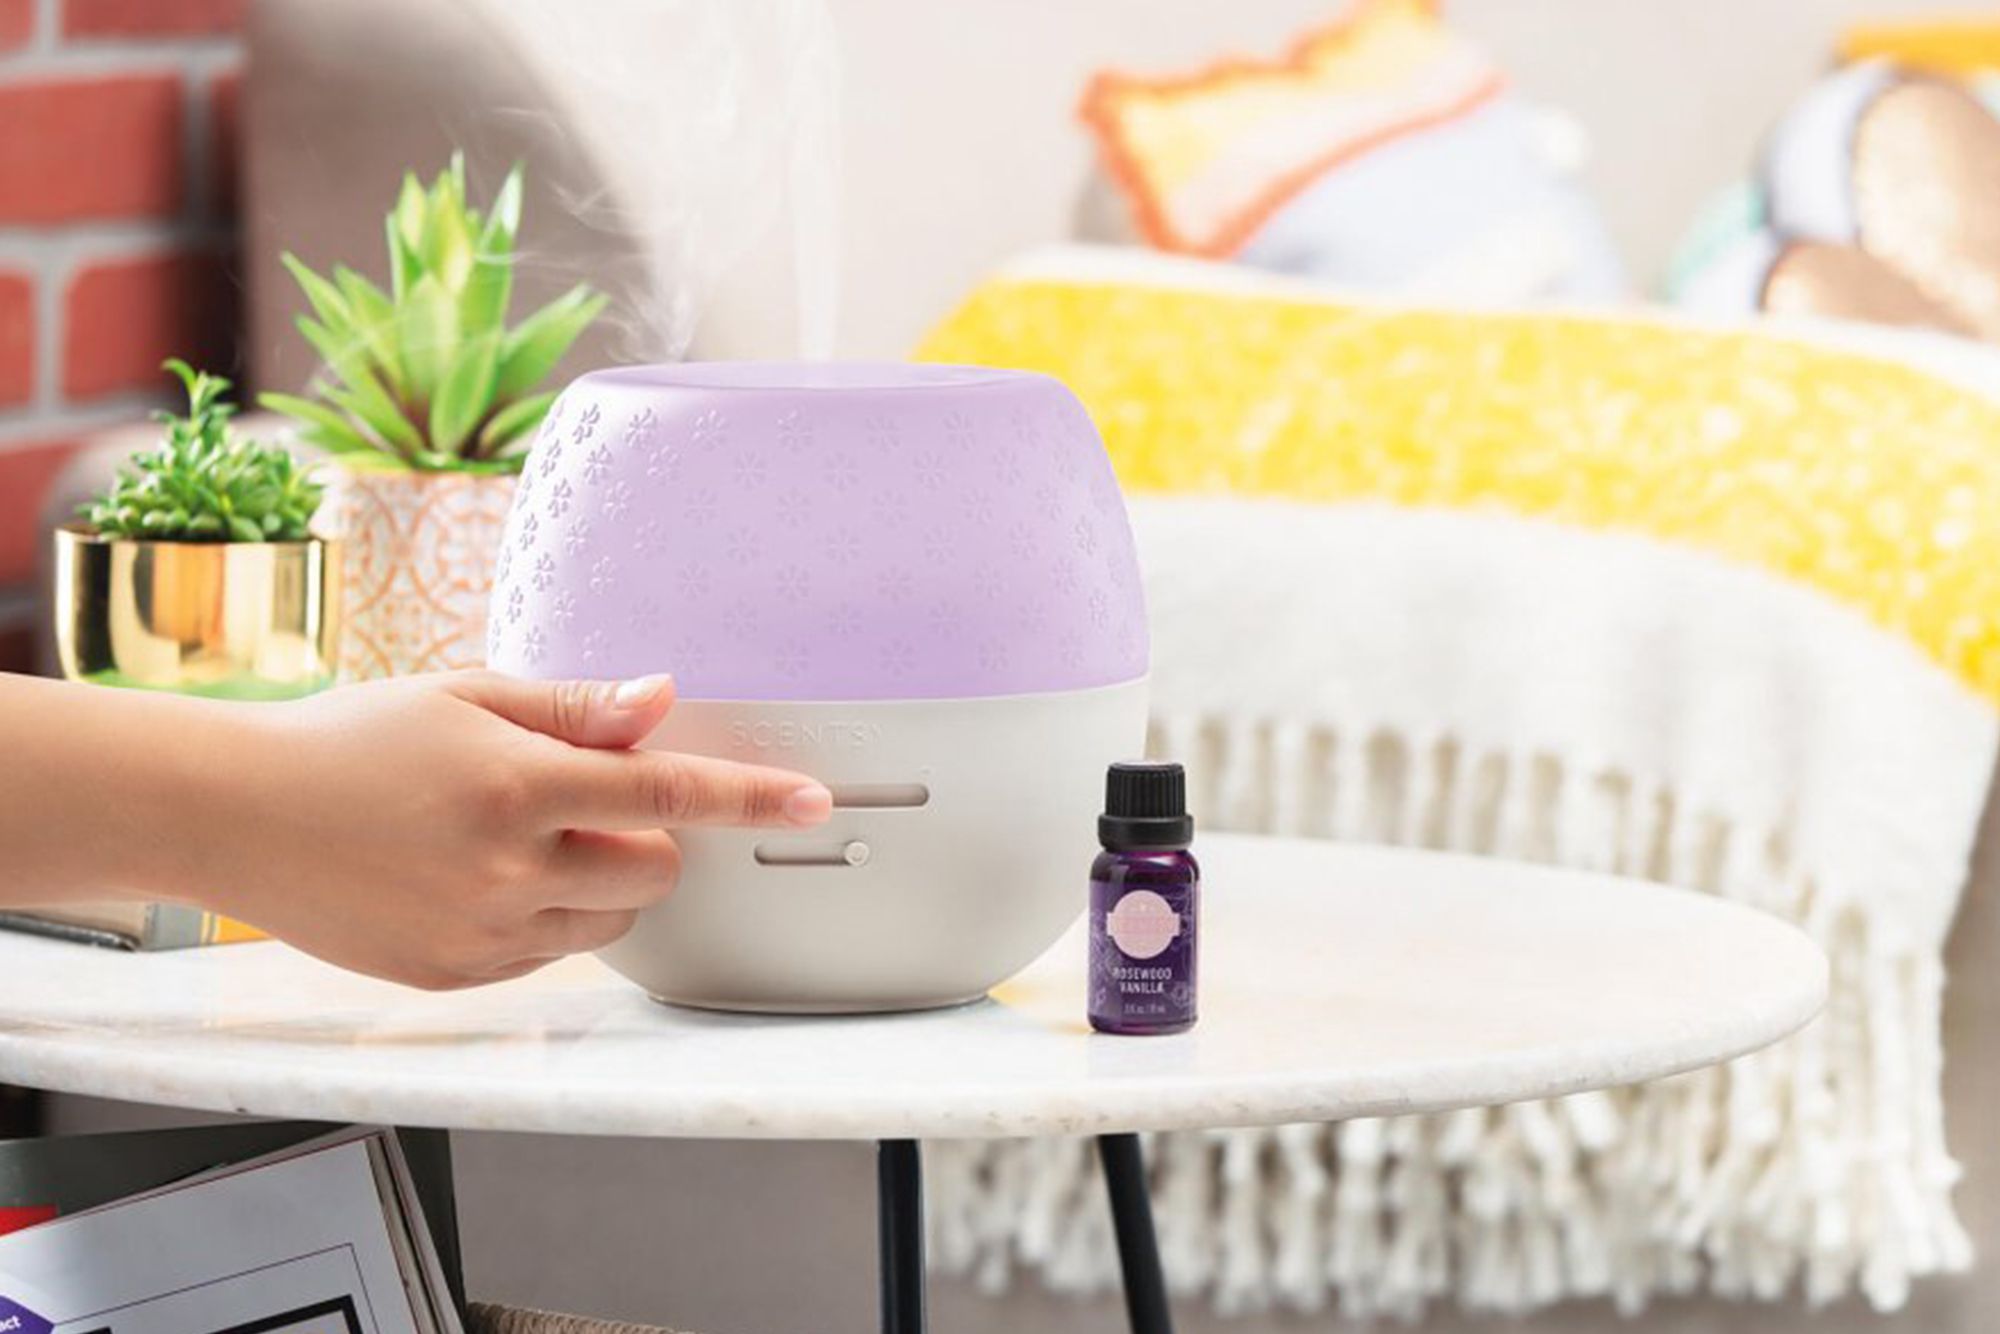 Scentsy's Deluxe Diffuser being switched on by a person off screen on a side table